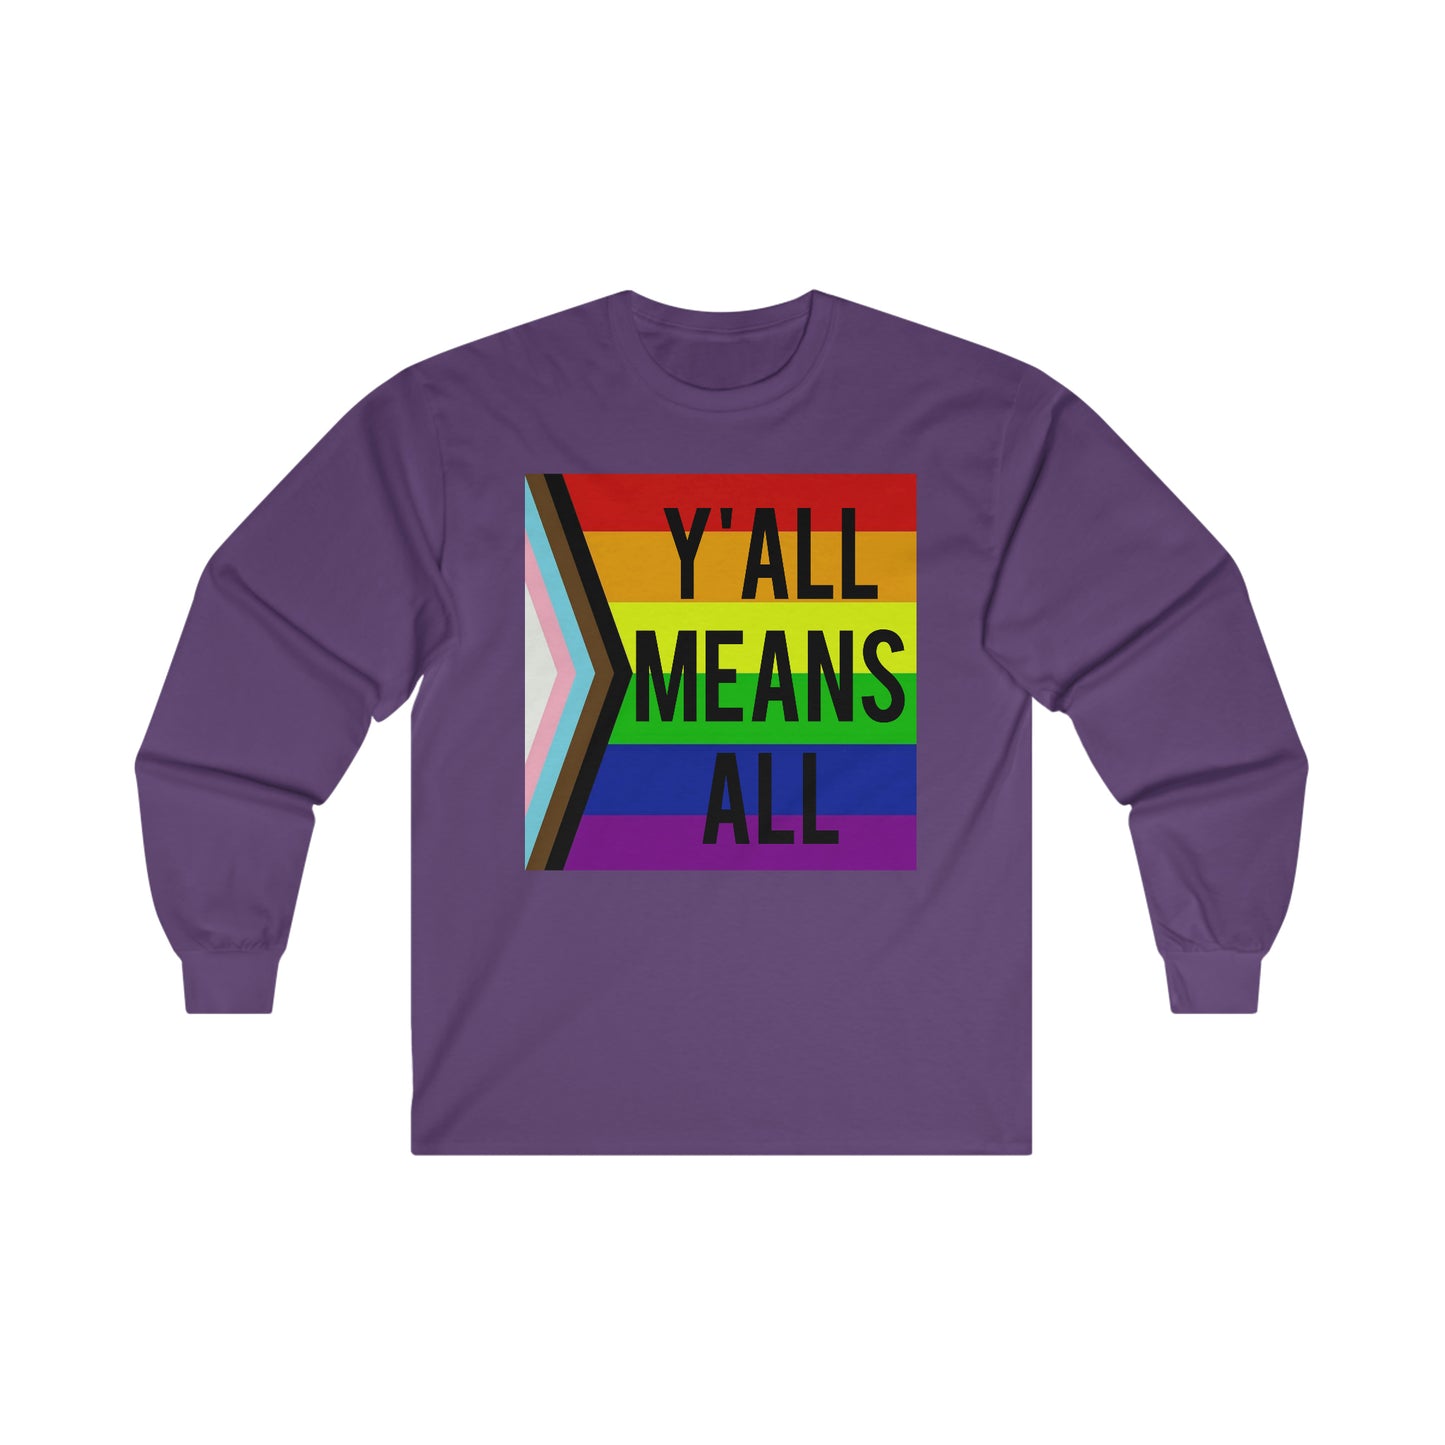 Y'ALL MEANS ALL LGBTQ Pride Adult Long Sleeve T-Shirt